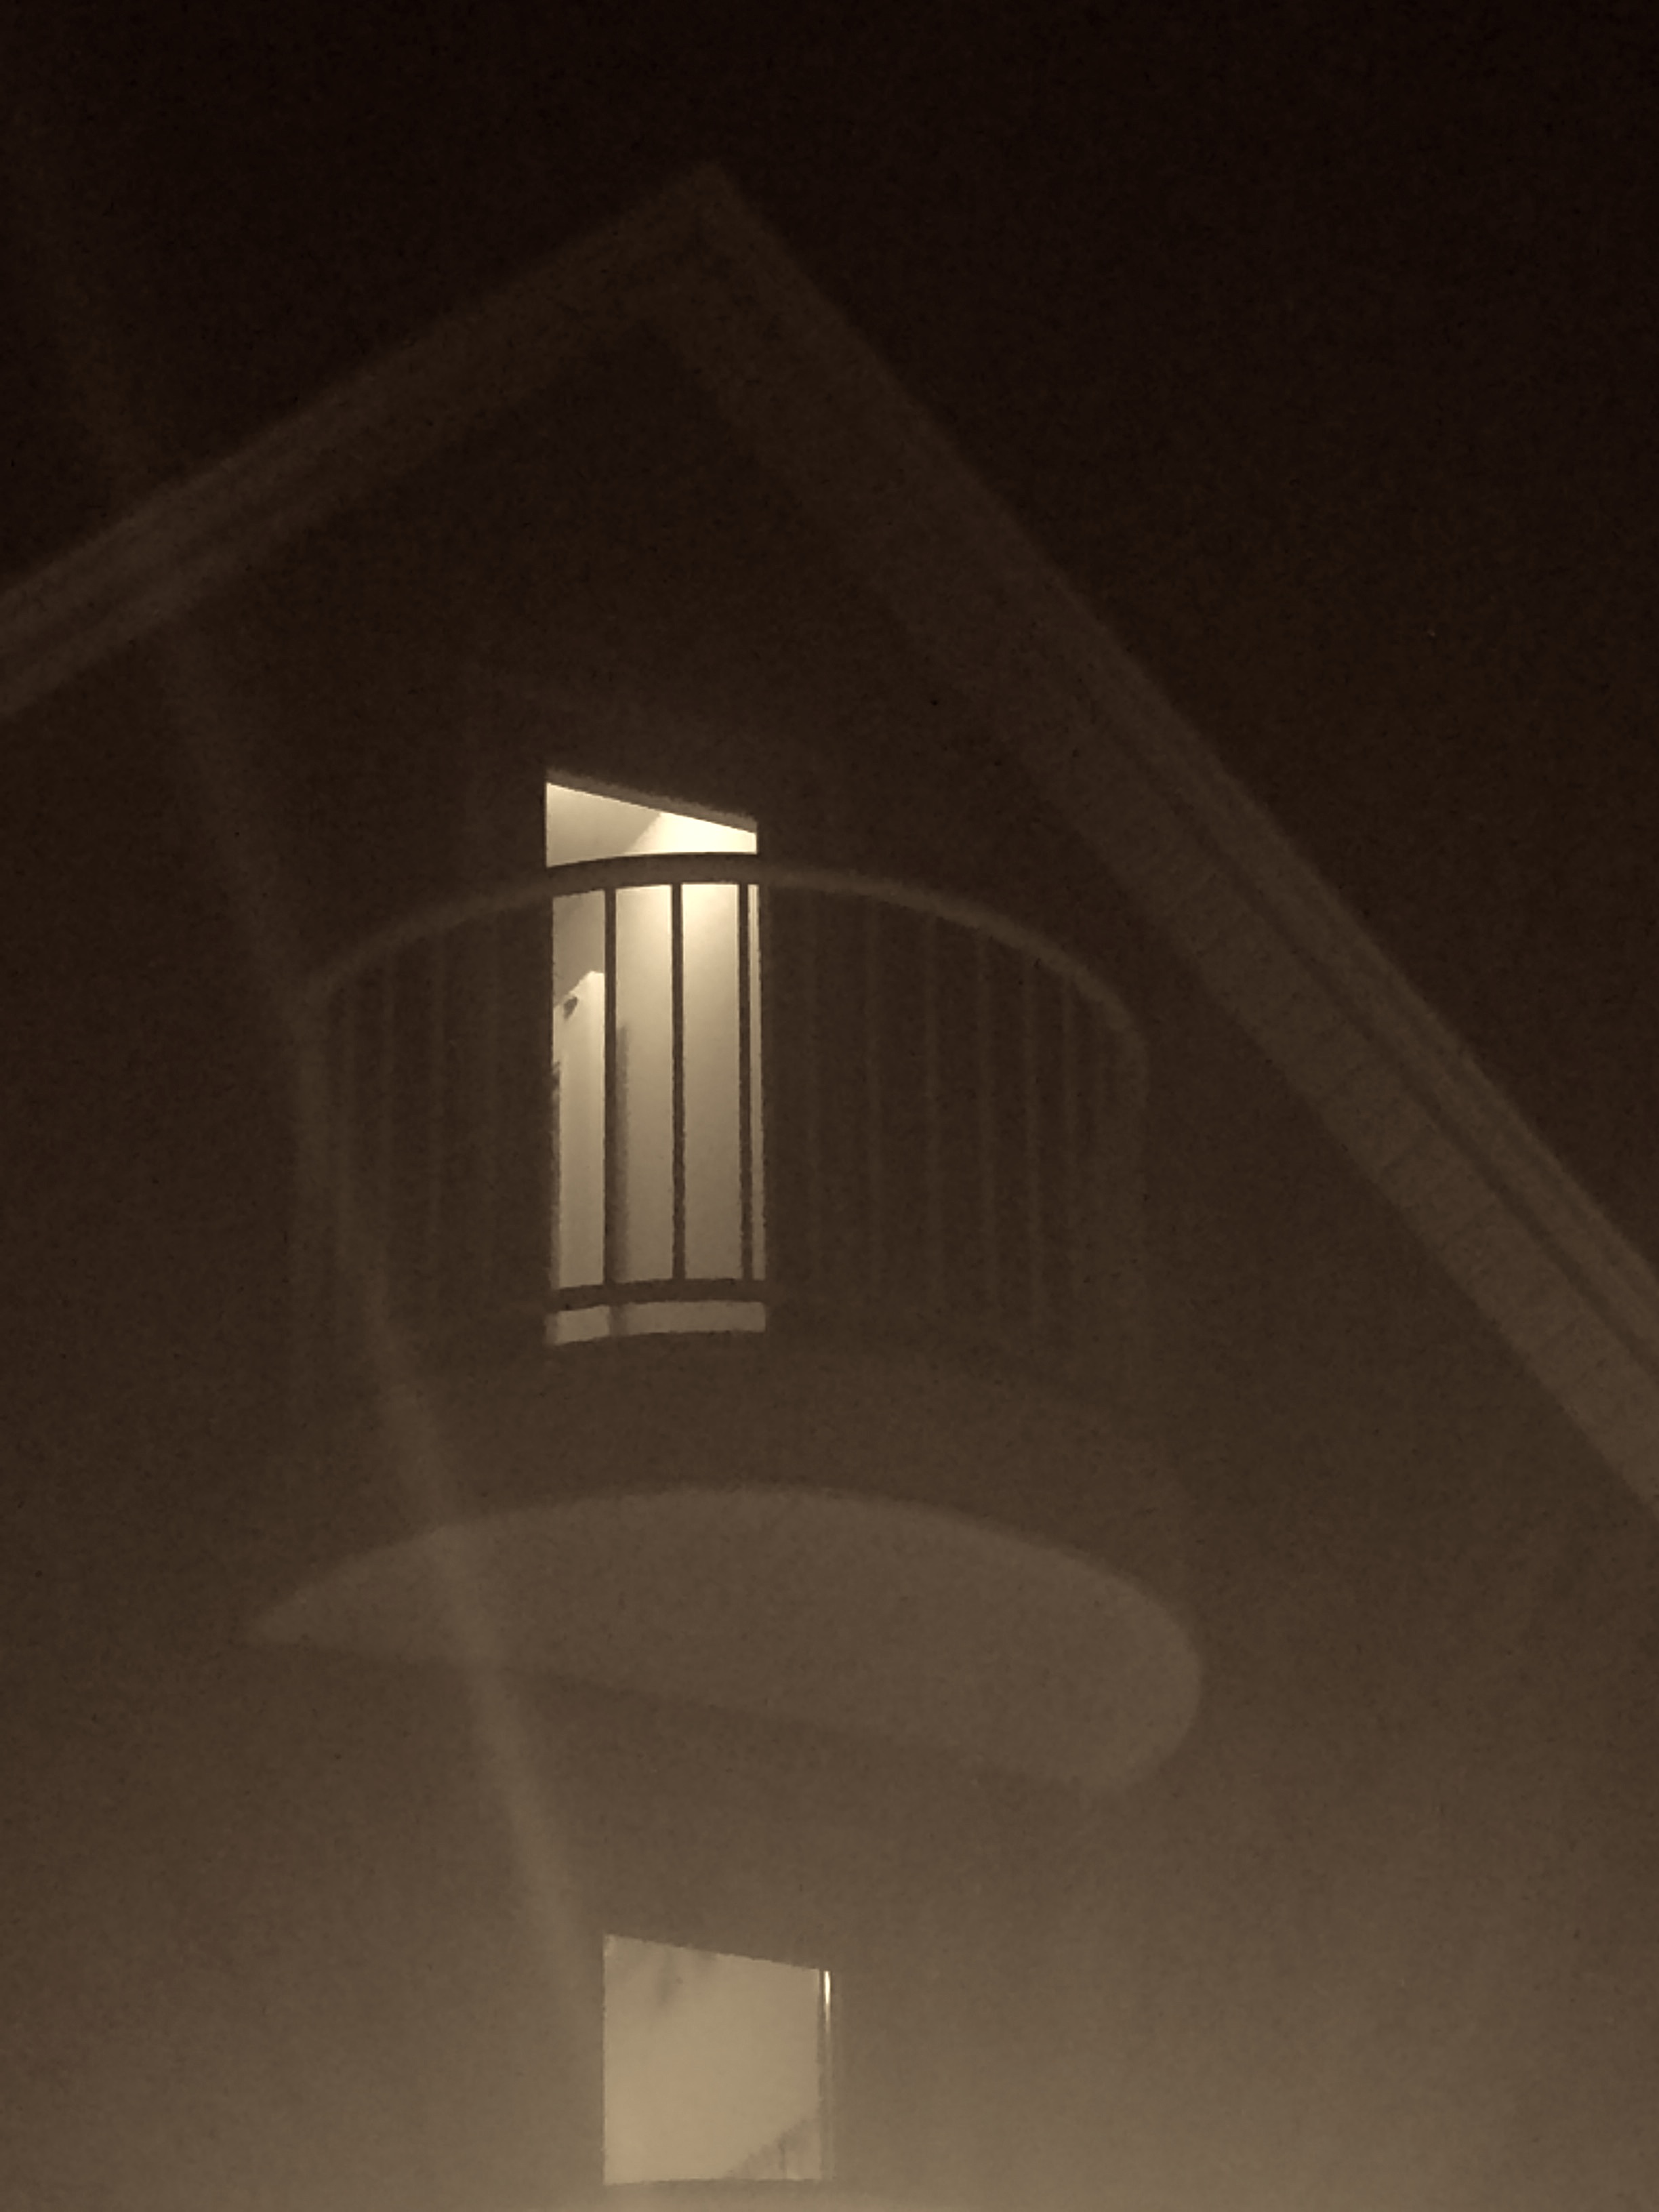 008 – Wife of deceased railroad employee appears on this balcony of the Suitor House